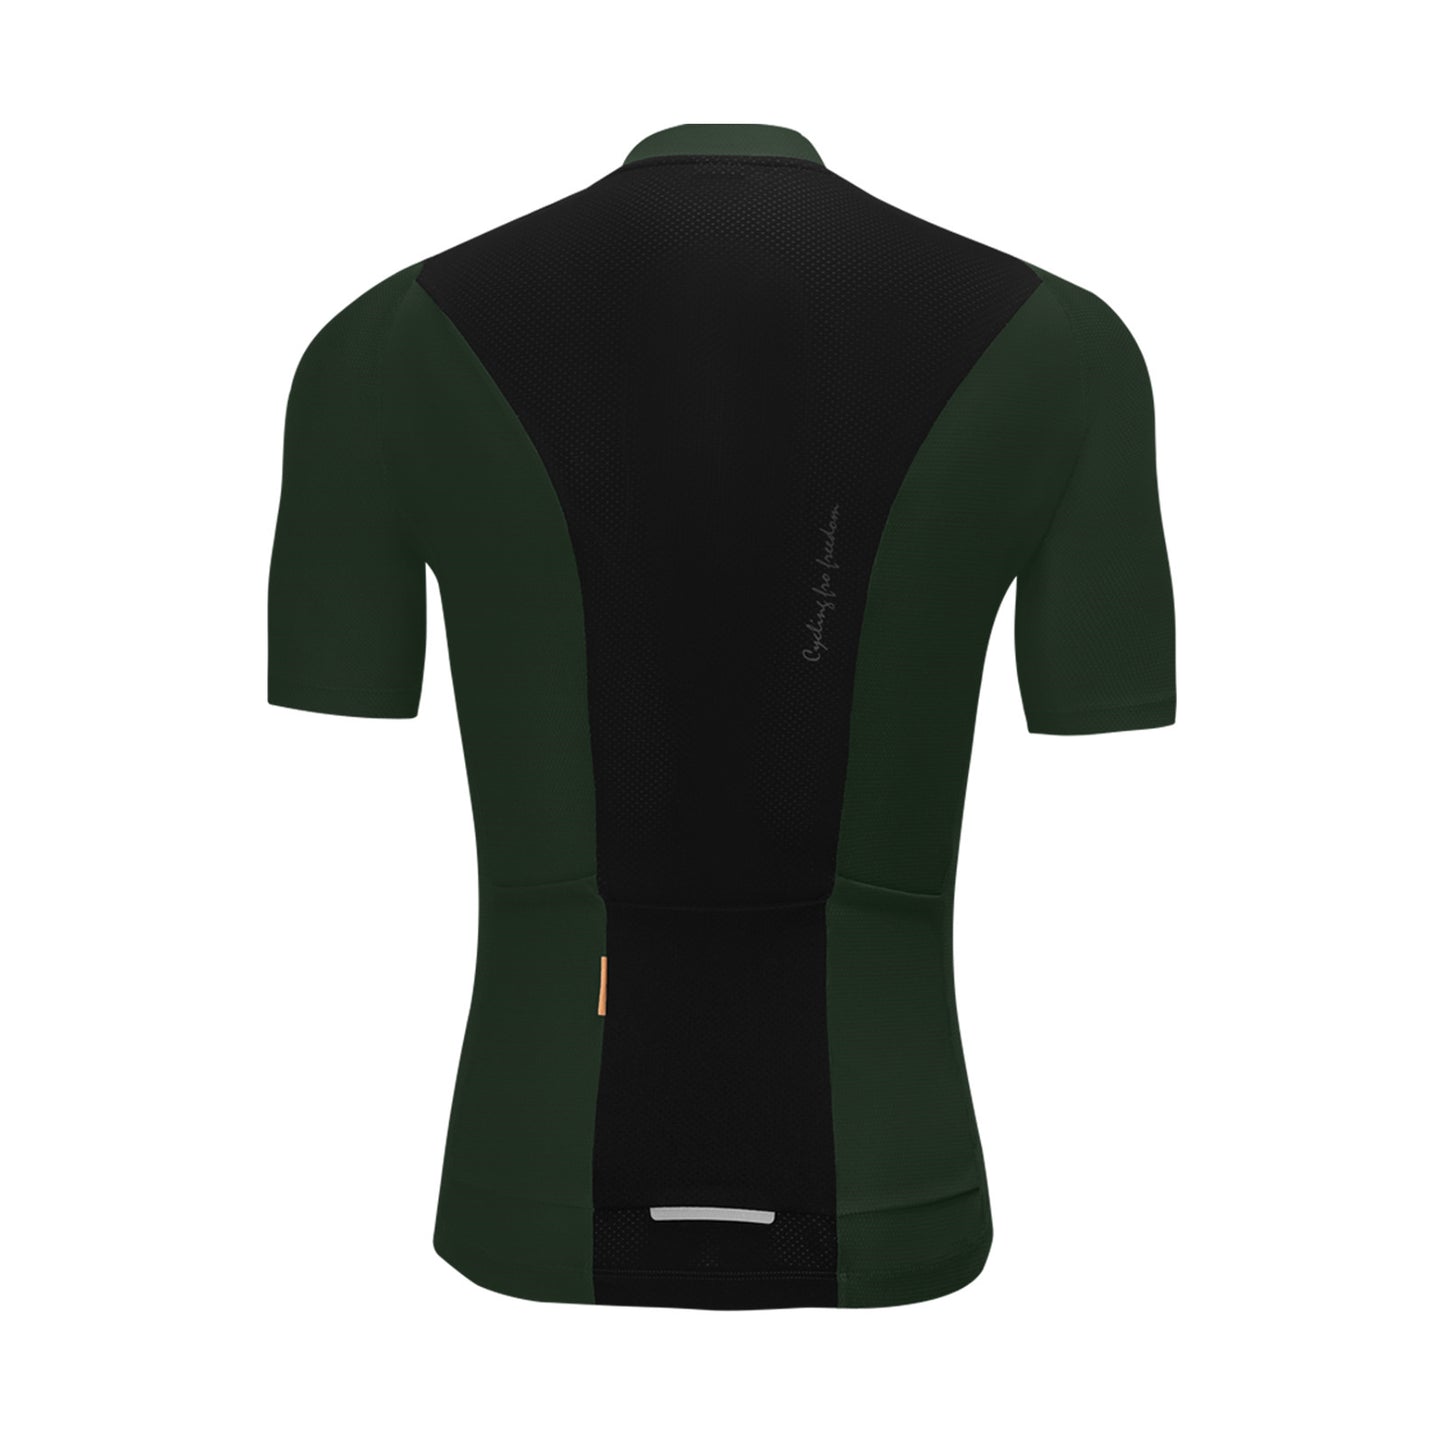 Santic Carden Men's Cycling Jersey Short Sleeves Breathable Green